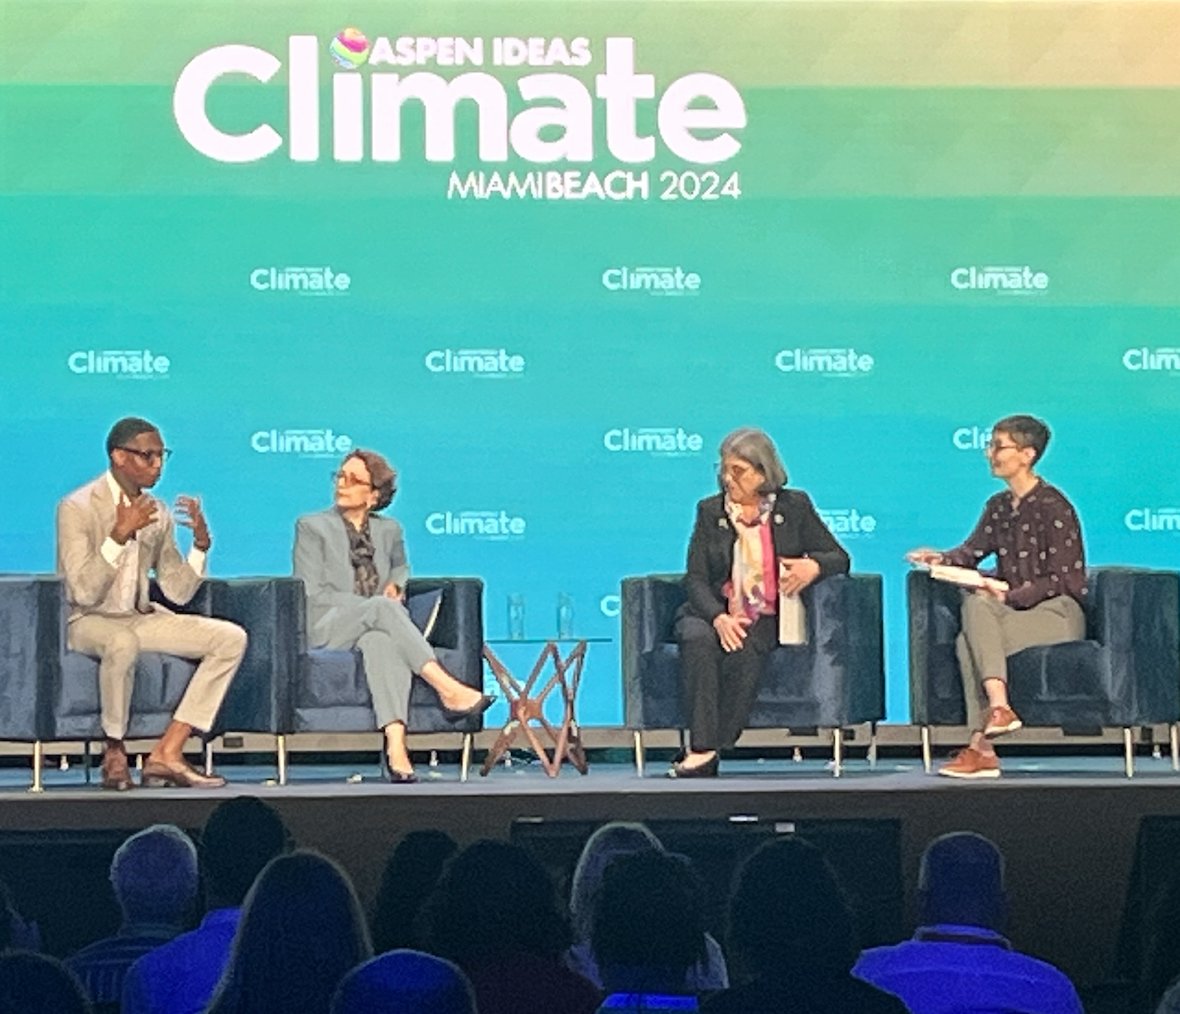 @aspenideas @c40cities @theUSDN “Mayors are on the frontlines of climate solutions,” says @MayorBibb, who joined @MayorDaniella to discuss how cities are reducing transportation emissions by embracing walkable cities🚶& adopting electric school buses 🚍 #AspenIdeasClimate